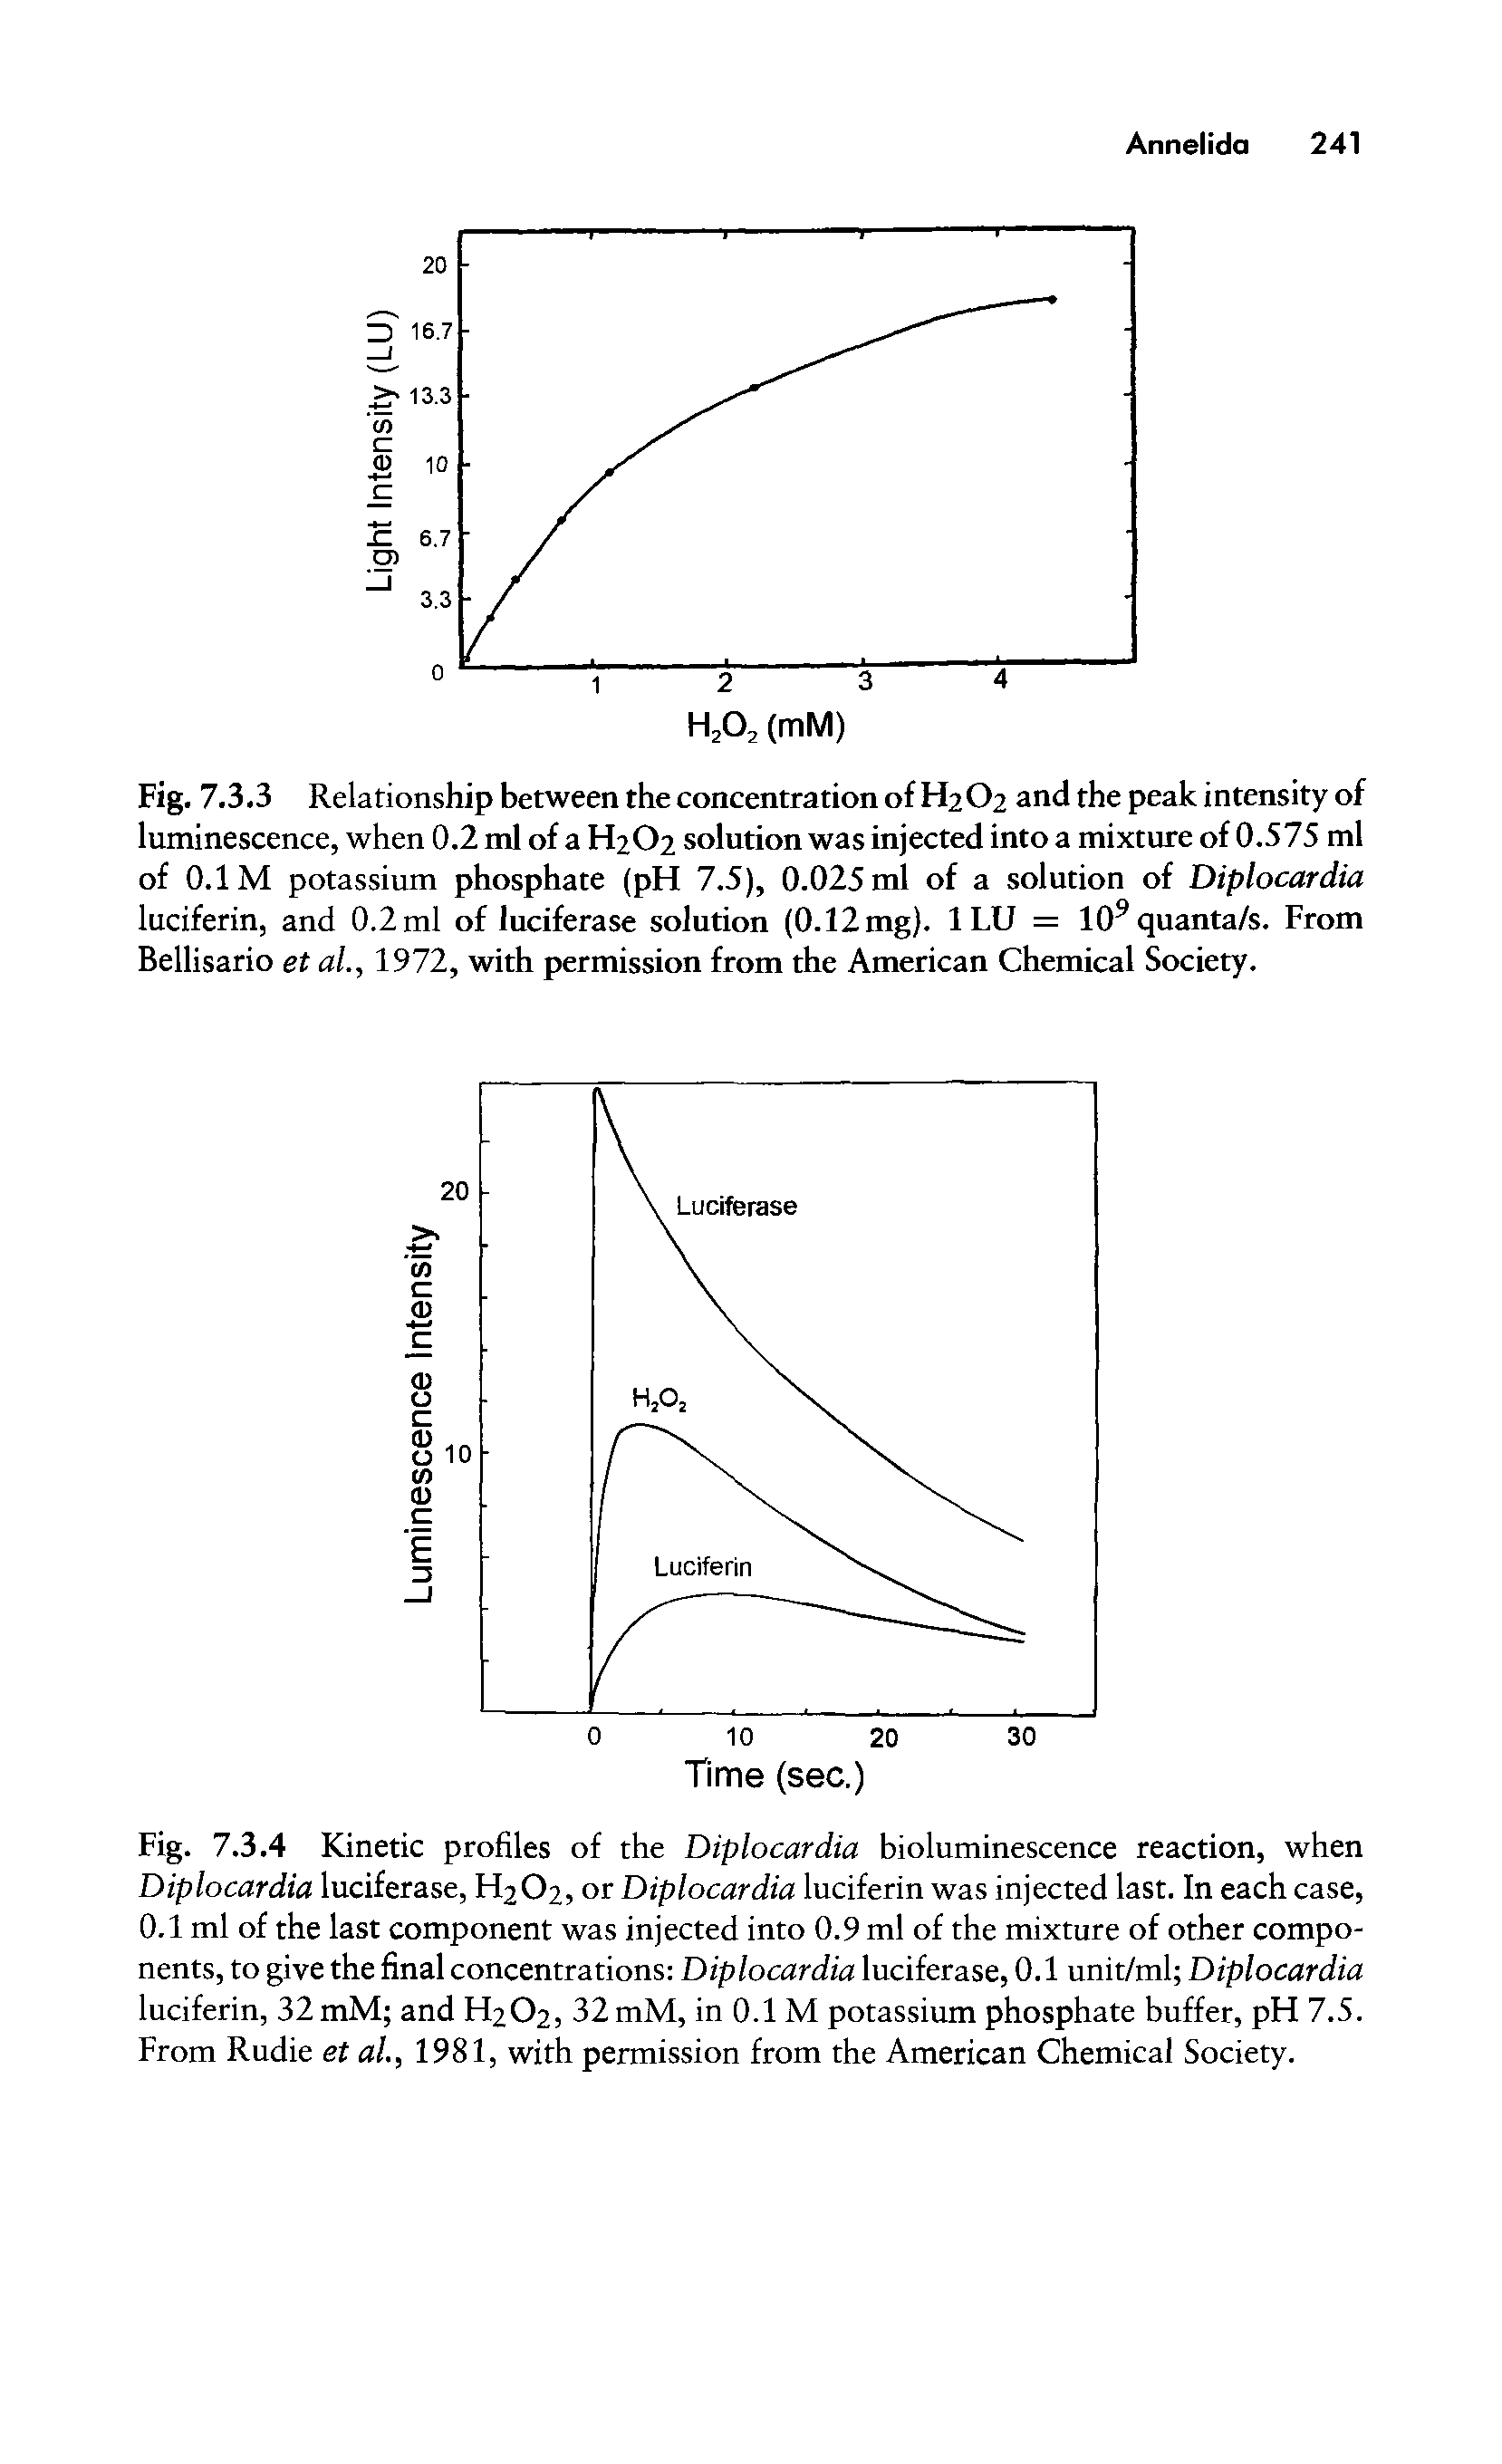 Fig. 7.3.4 Kinetic profiles of the Diplocardia bioluminescence reaction, when Diplocardia luciferase, H2O2, or Diplocardia luciferin was injected last. In each case, 0.1 ml of the last component was injected into 0.9 ml of the mixture of other components, to give the final concentrations Diplocardia luciferase, 0.1 unit/ml Diplocardia luciferin, 32 mM and H2O2, 32 mM, in 0.1 M potassium phosphate buffer, pH 7.5. From Rudie et al., 1981, with permission from the American Chemical Society.